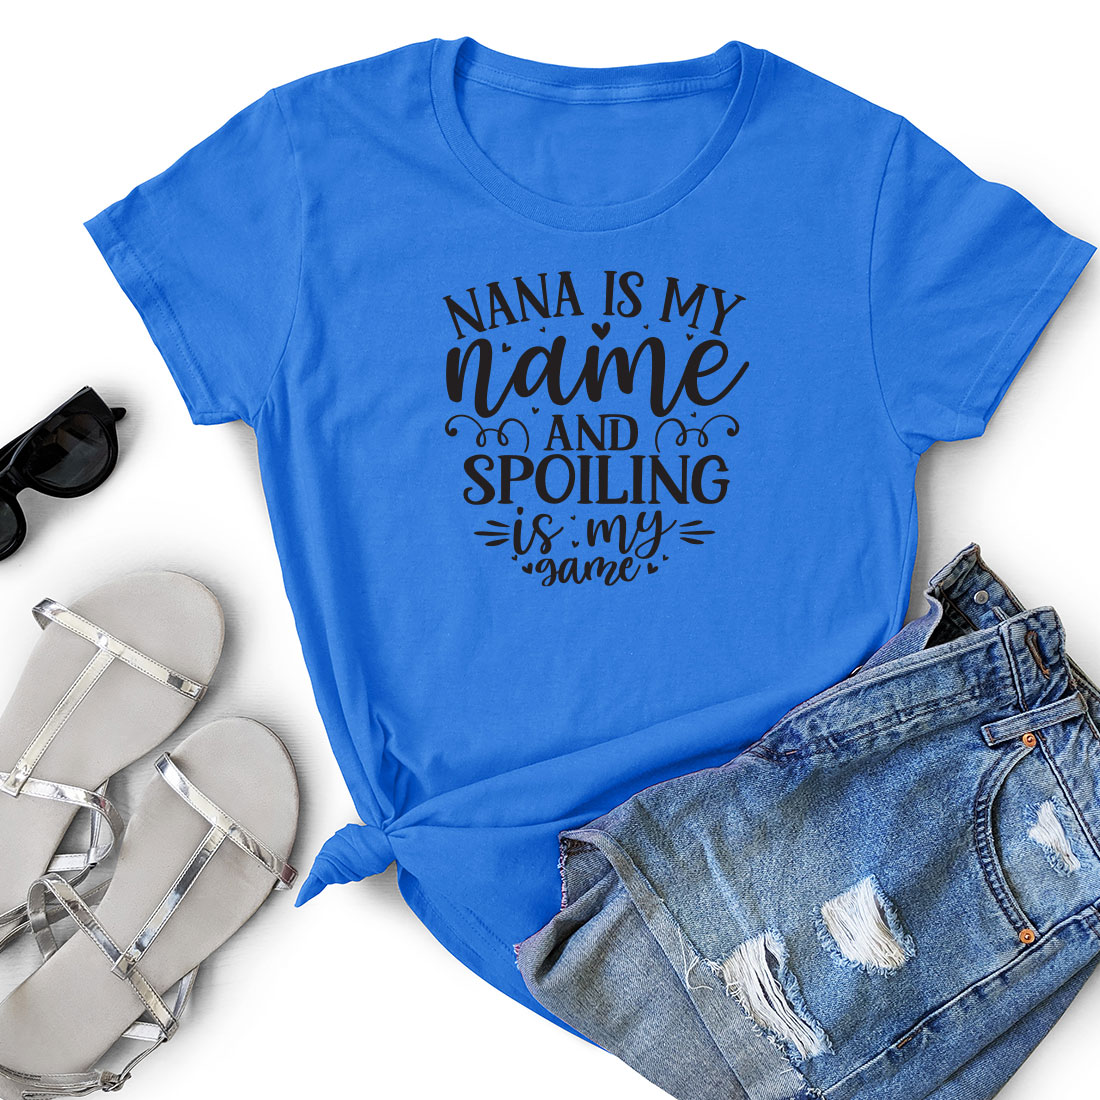 T - shirt that says wanna is my name and spoiling is my name.